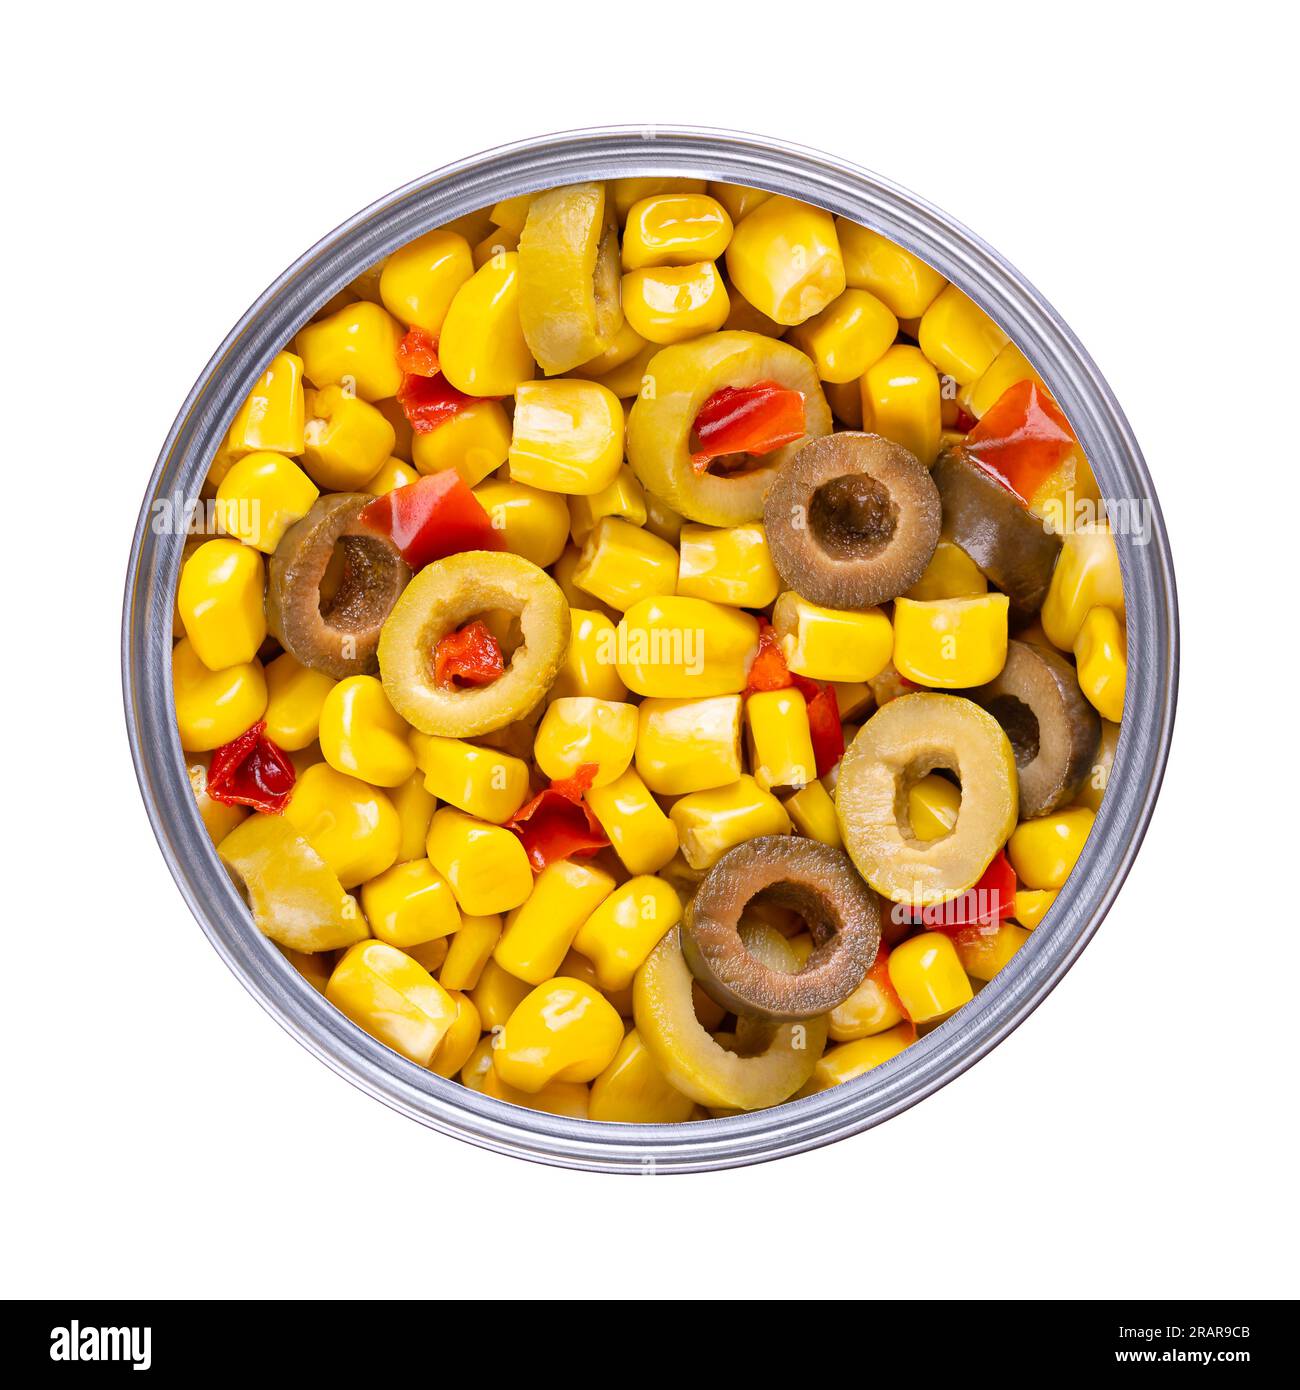 Mix of canned corn, sliced green and black olives and diced red bell pepper, in an open can. Mediterranean maize mix, as side dish or to a barbecue. Stock Photo